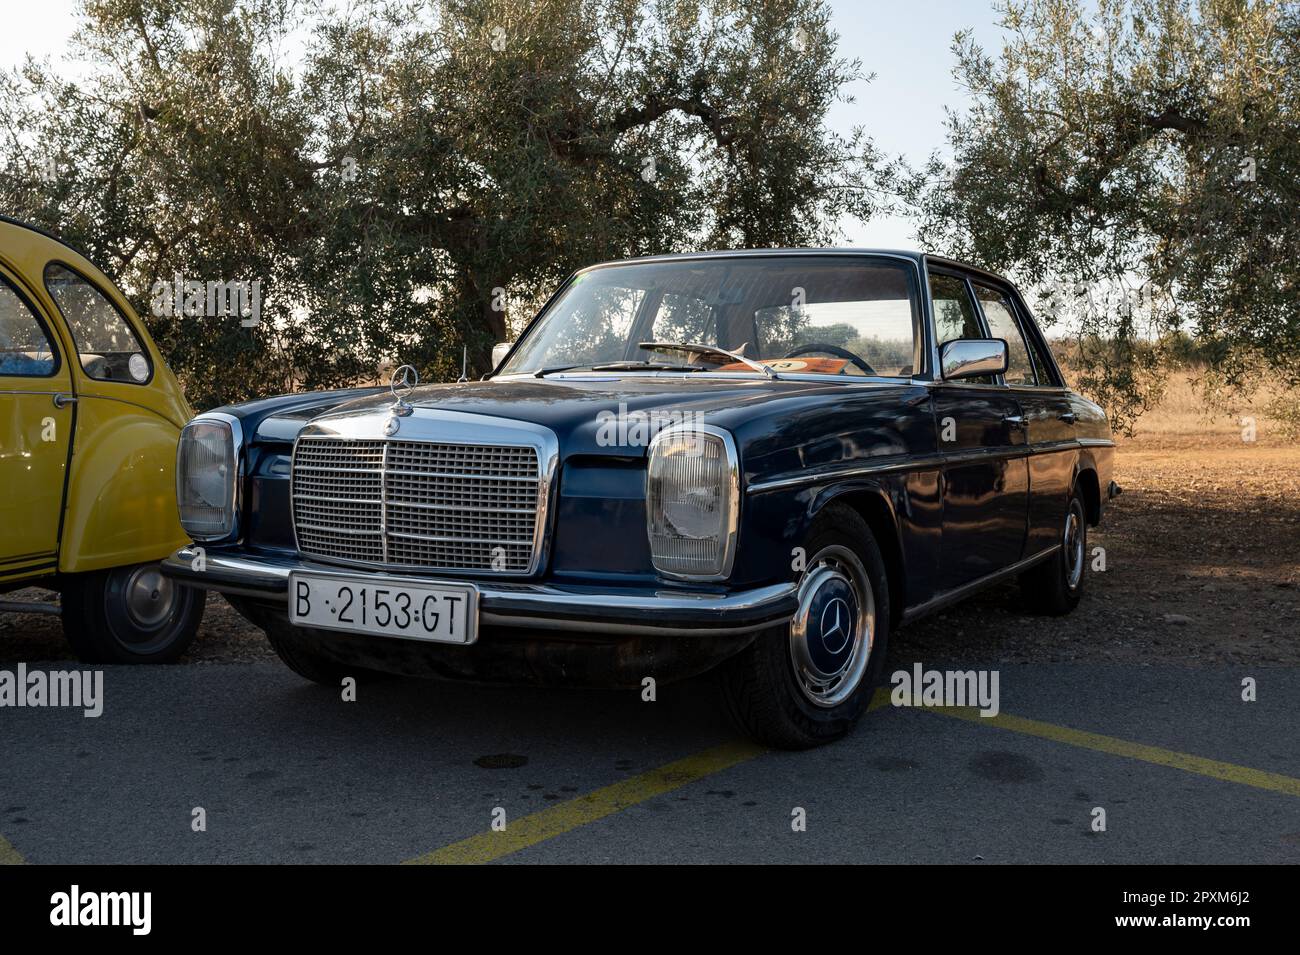 Detail of a beautiful German luxury classic car, it is a blue Mercedes Benz W115 W114 Stock Photo